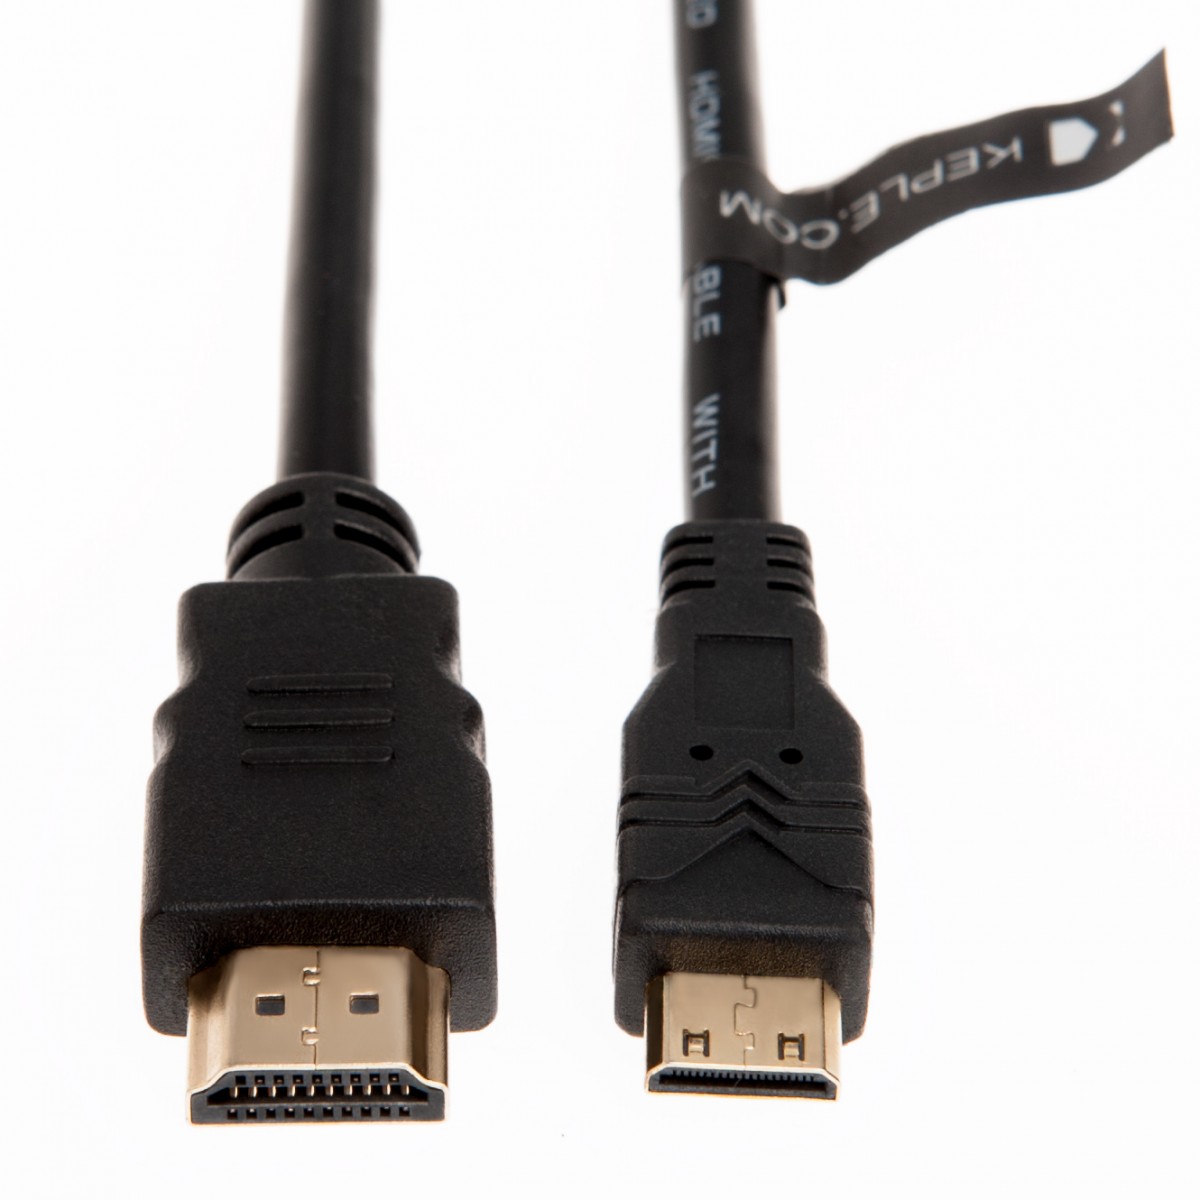 can i use hdmi cable to connect laptop to projector